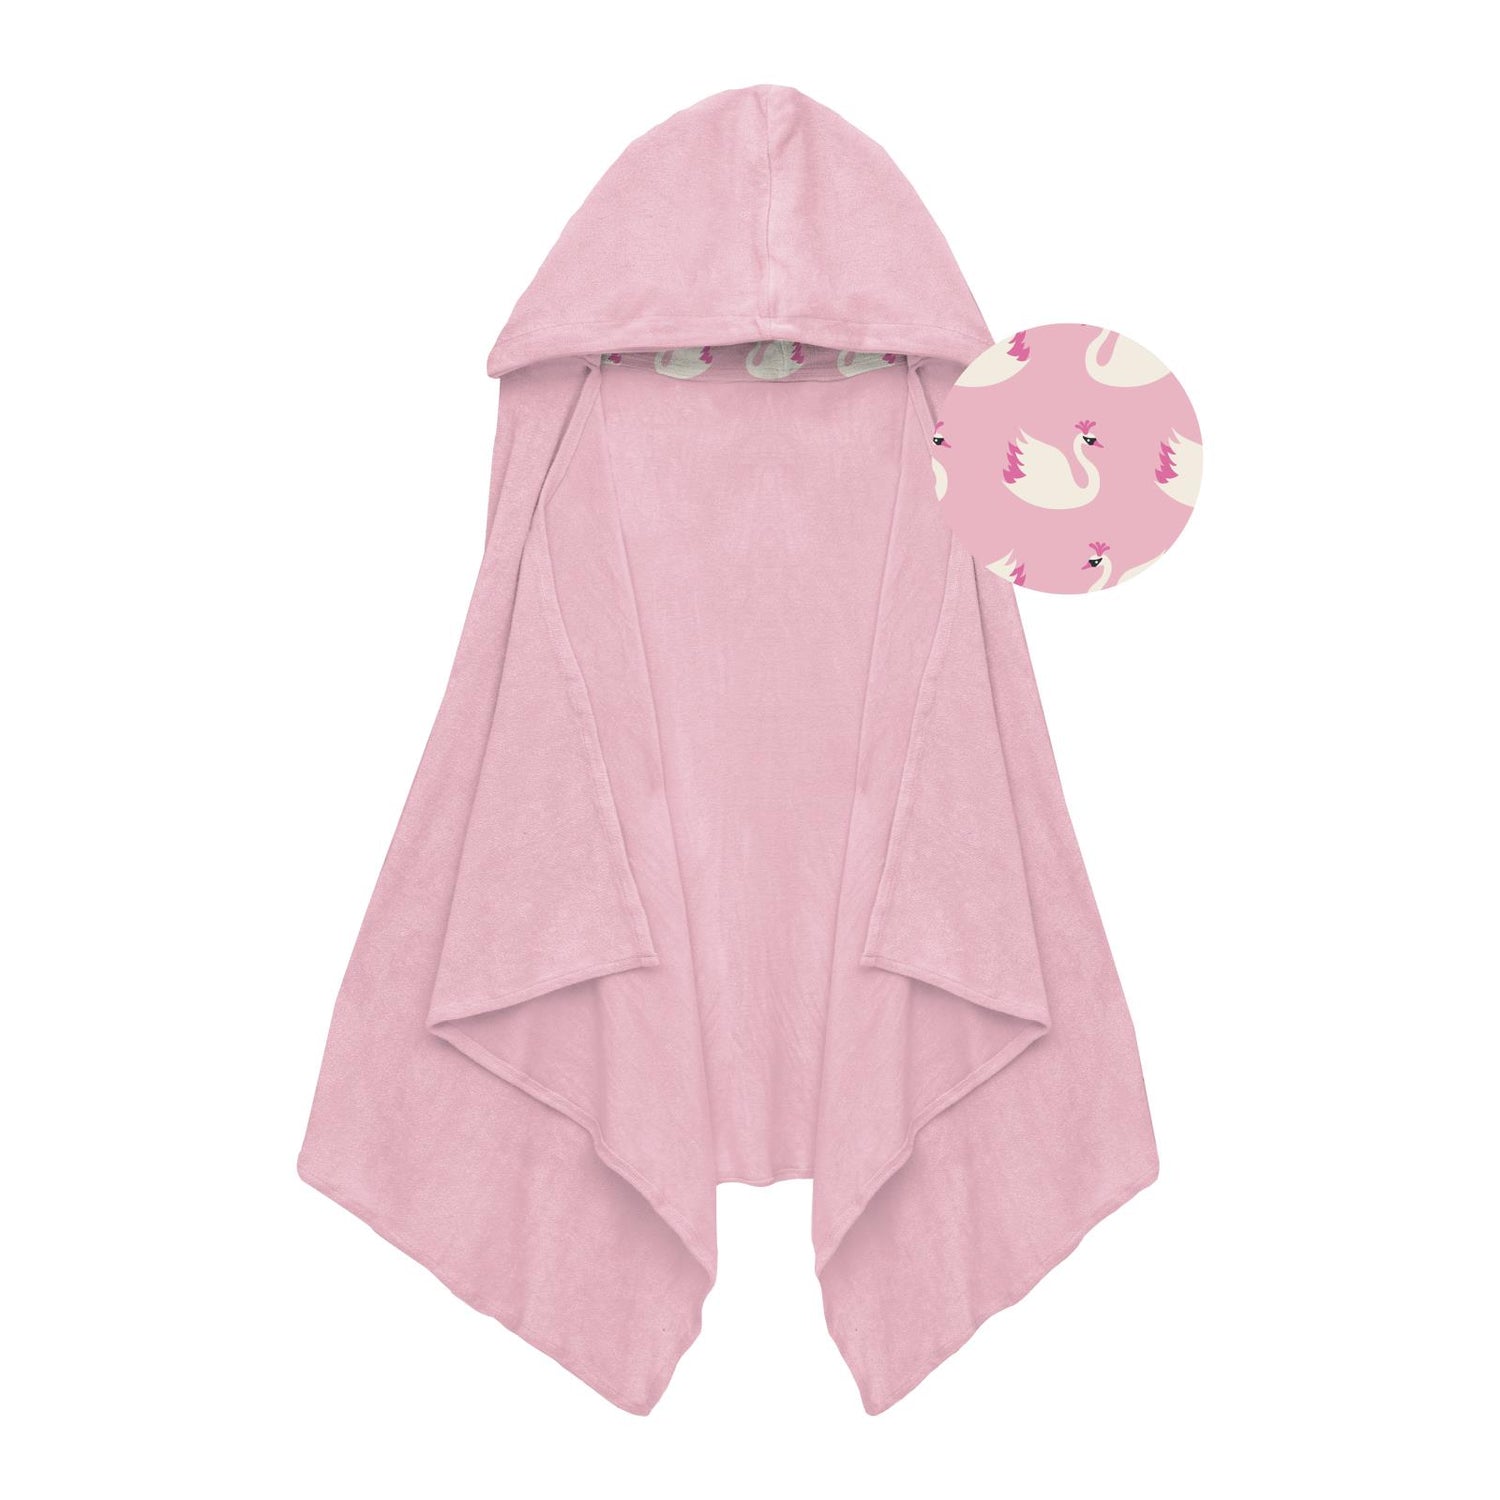 Terry Hooded Towel with Print Lined Hood in Cake Pop with Cake Pop Swan Princess